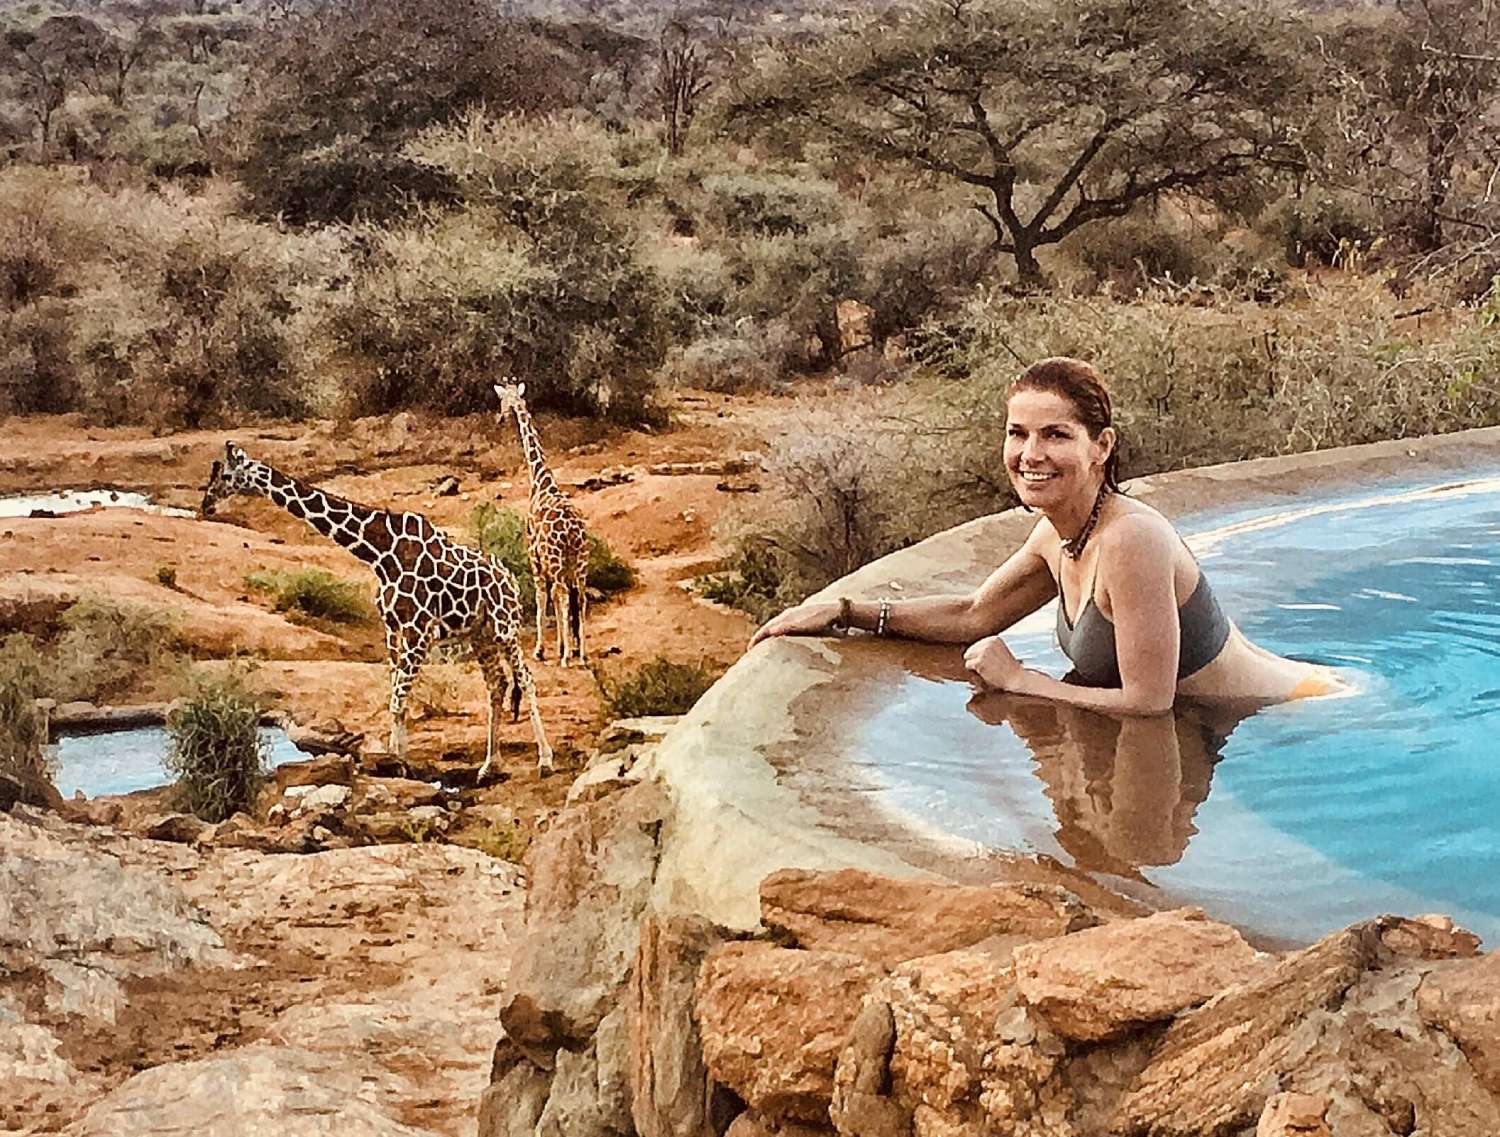 A woman in the water next to two giraffes.